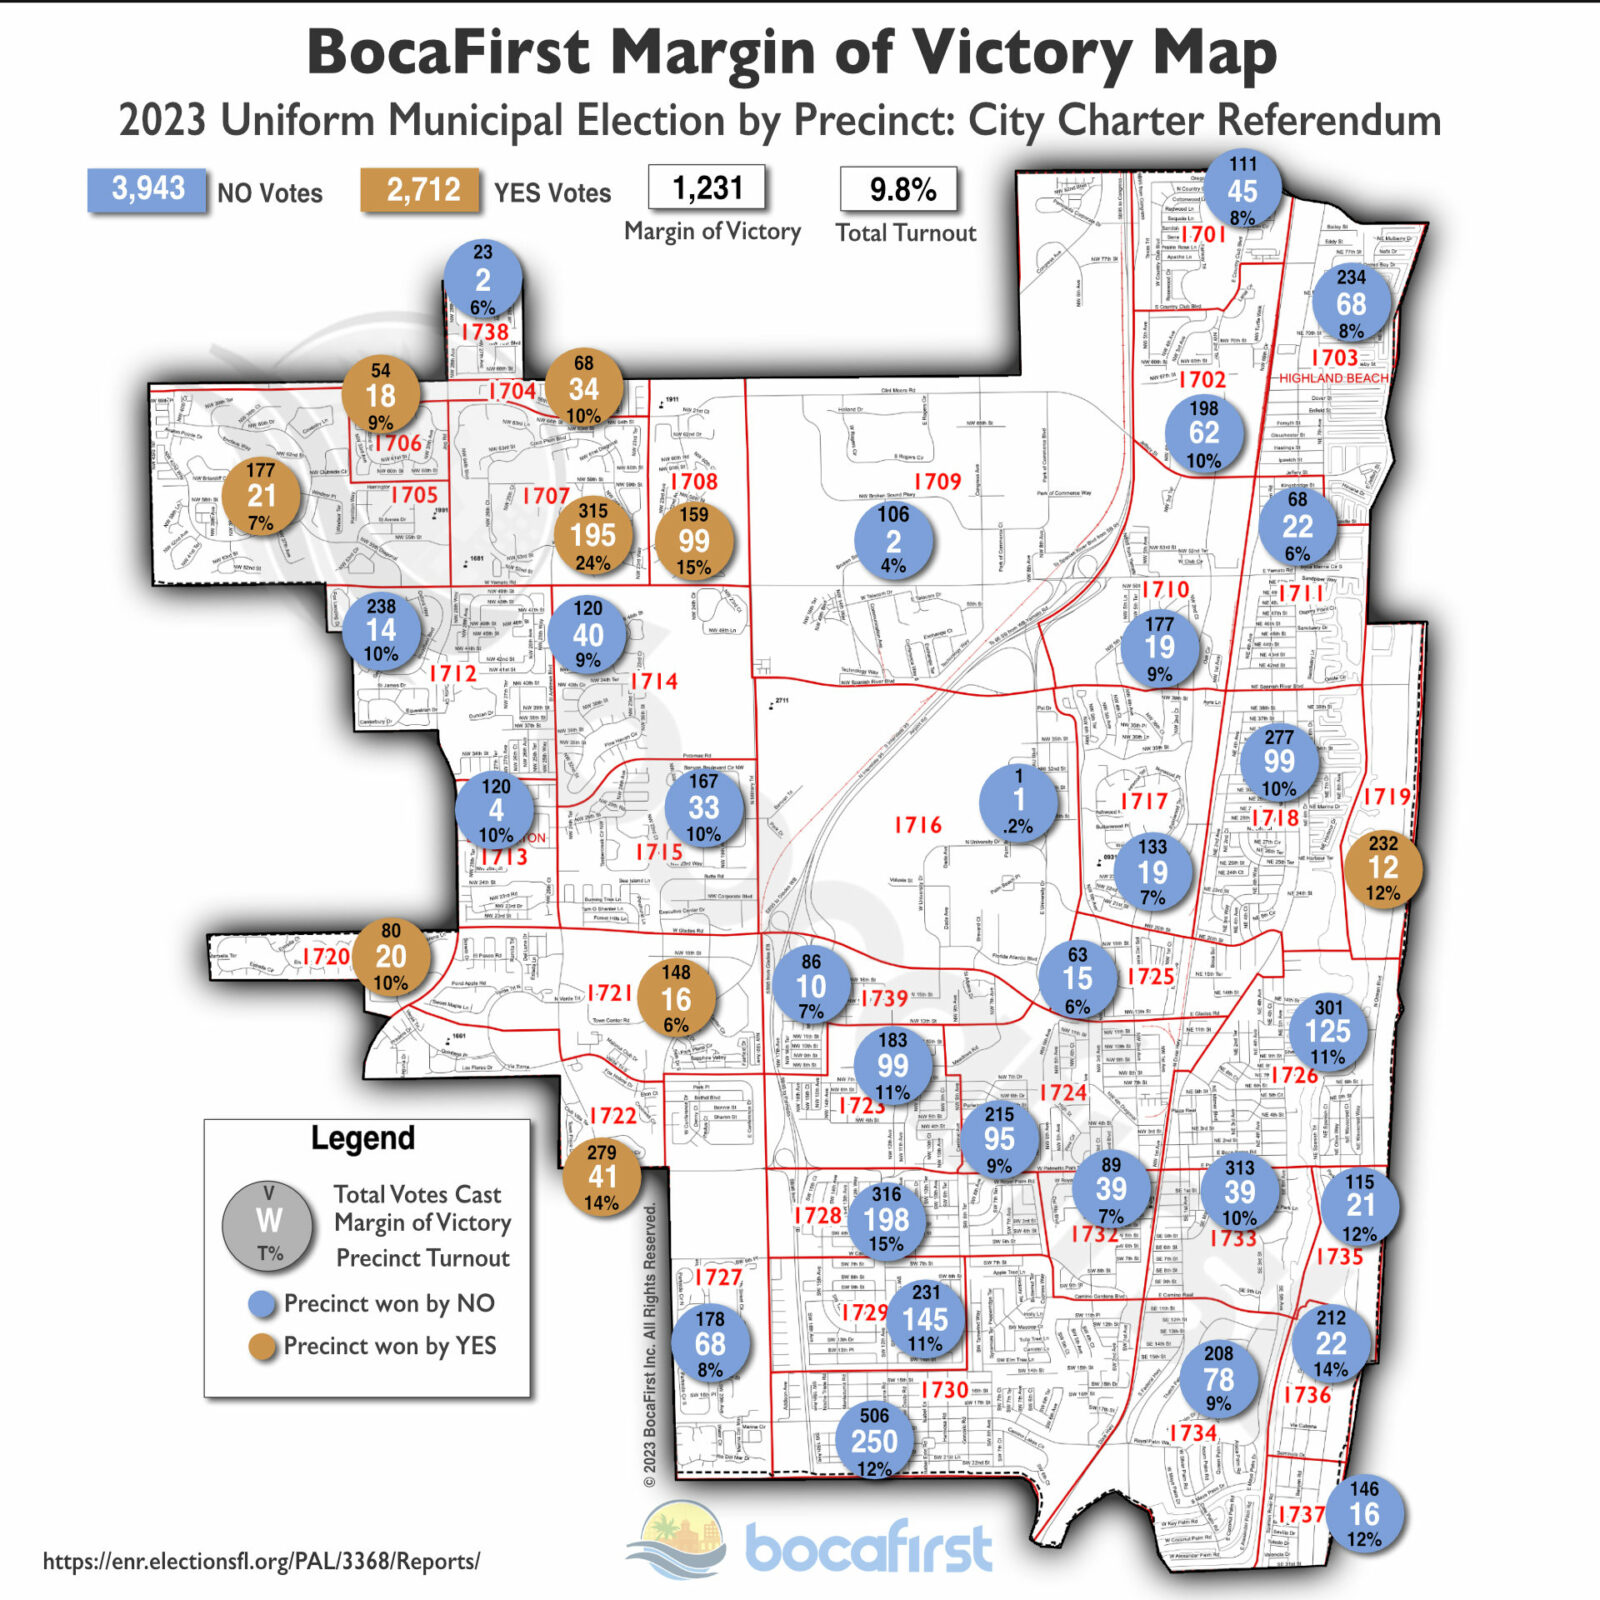 BocaFirst Detailed Margin of Victory Infographic. Graphic by Les Wilson.